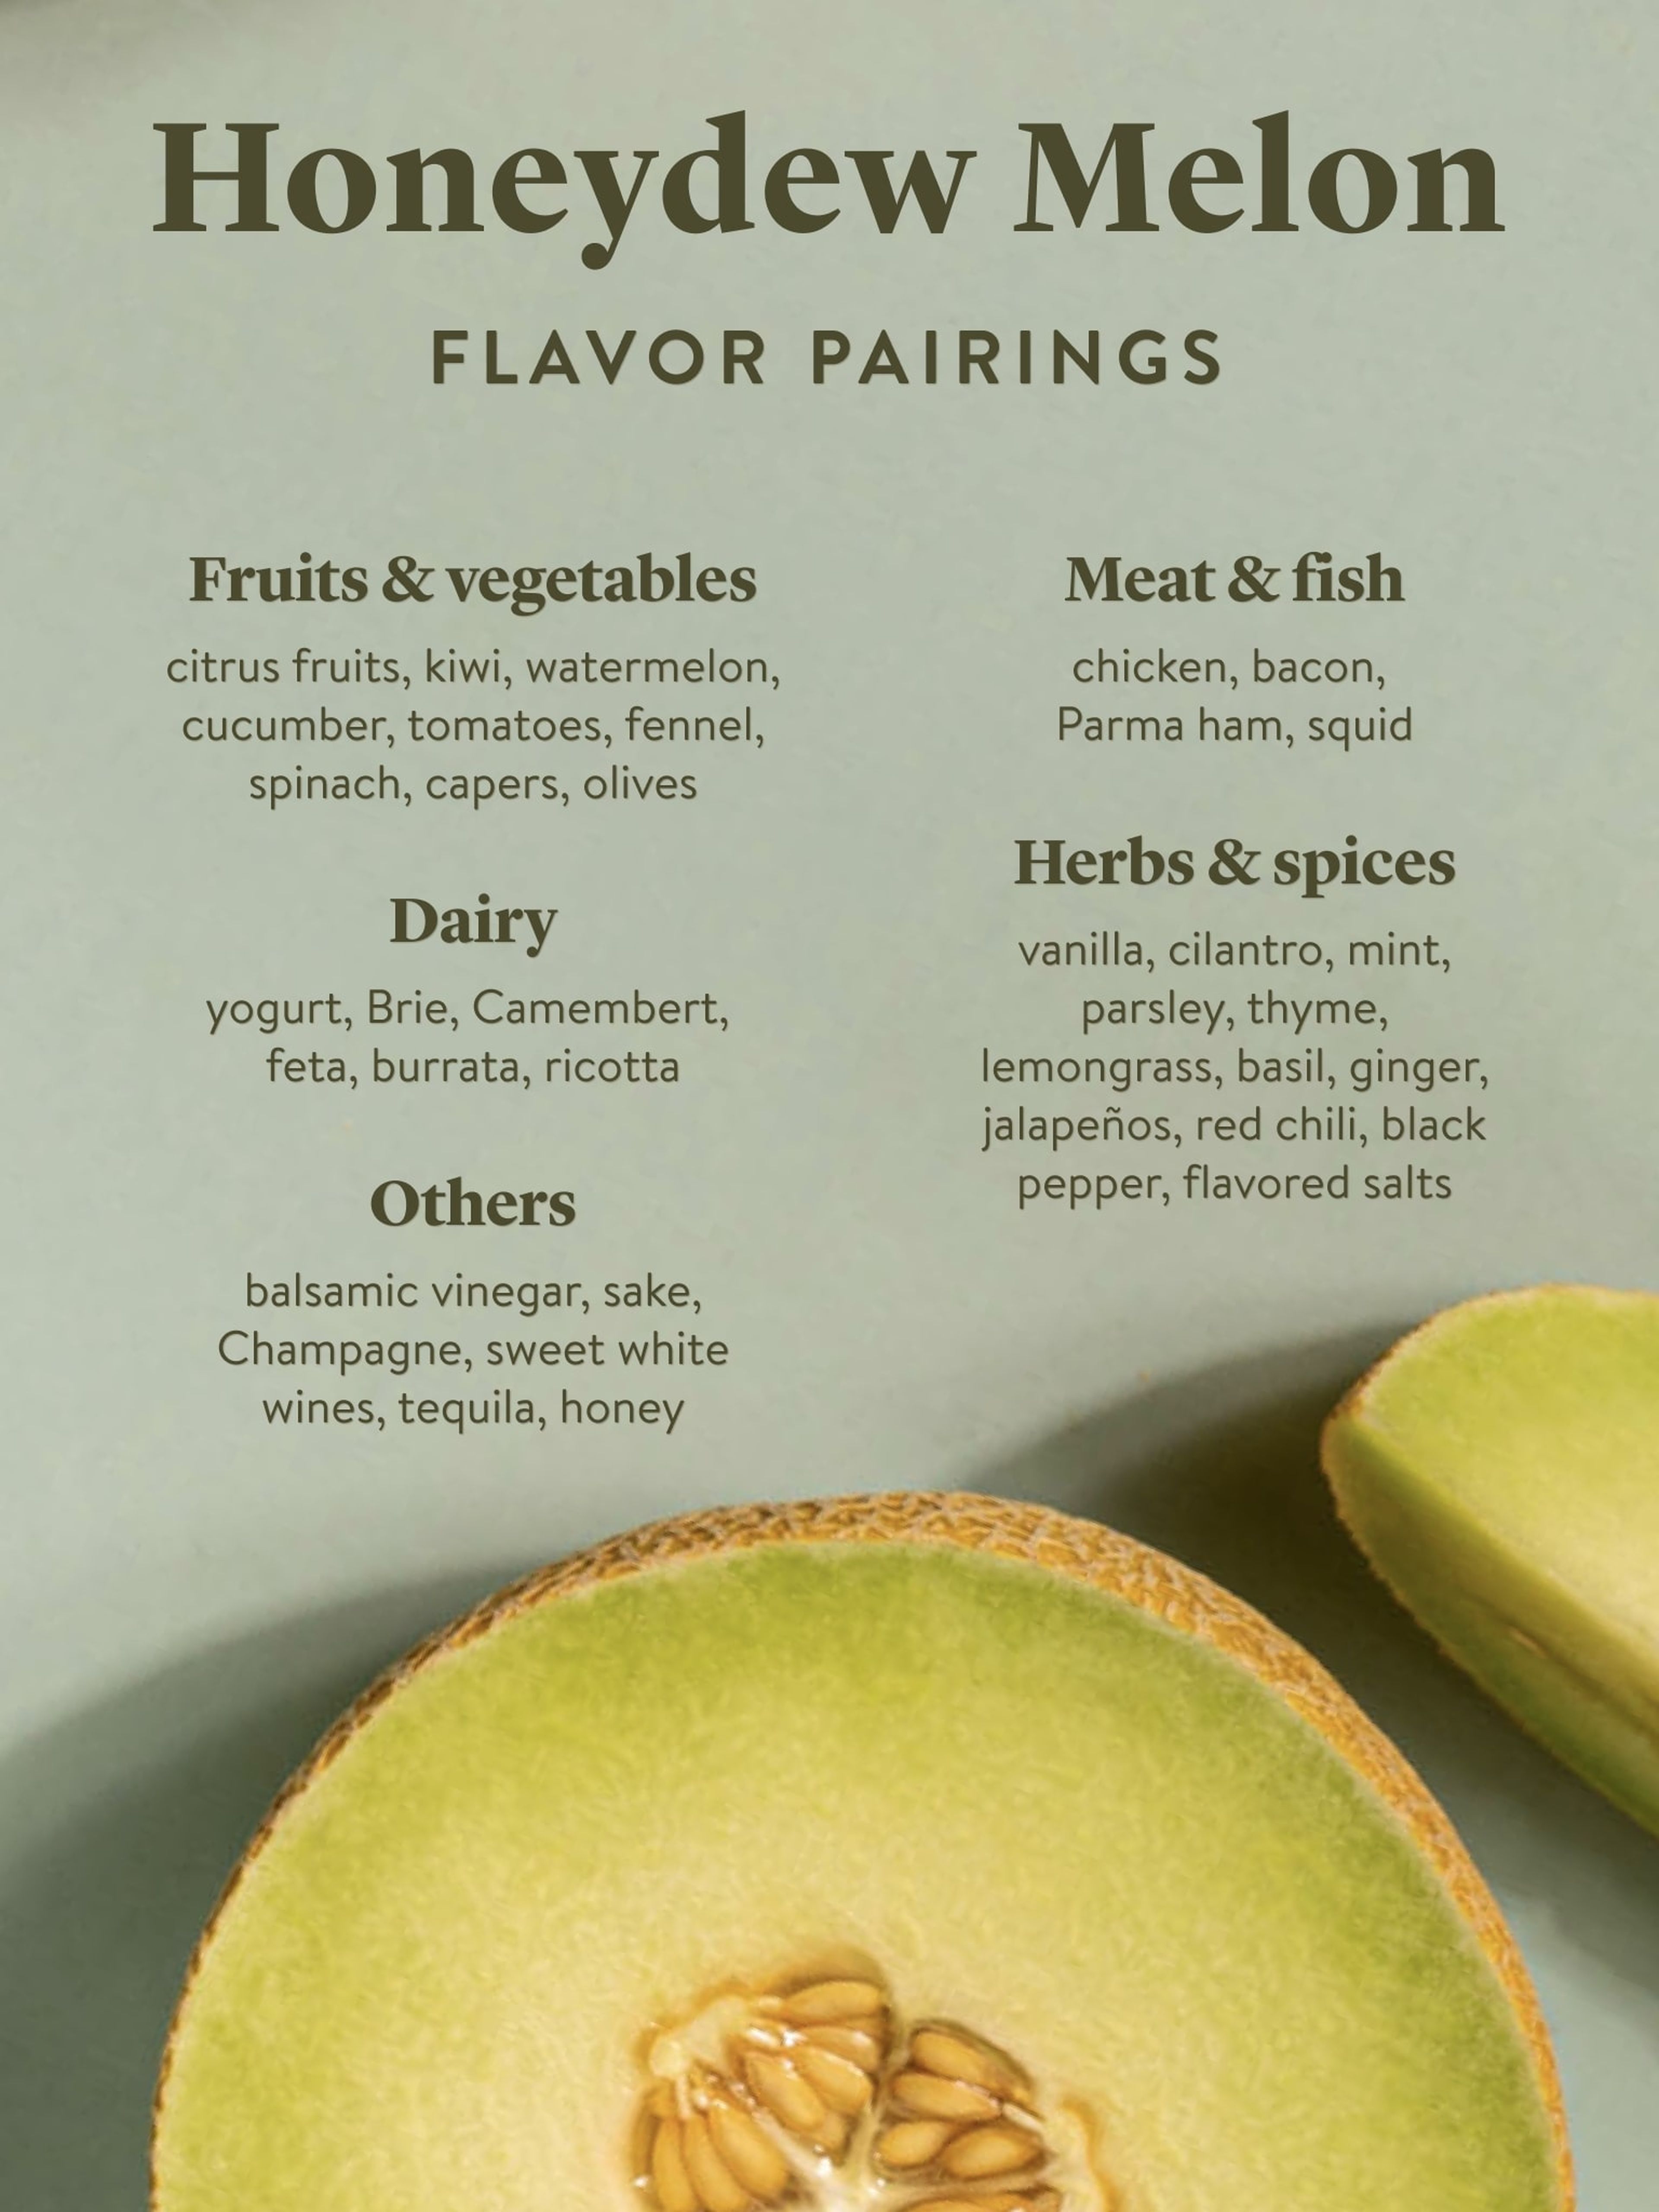 How to pick out and ripen the perfect honeydew melon